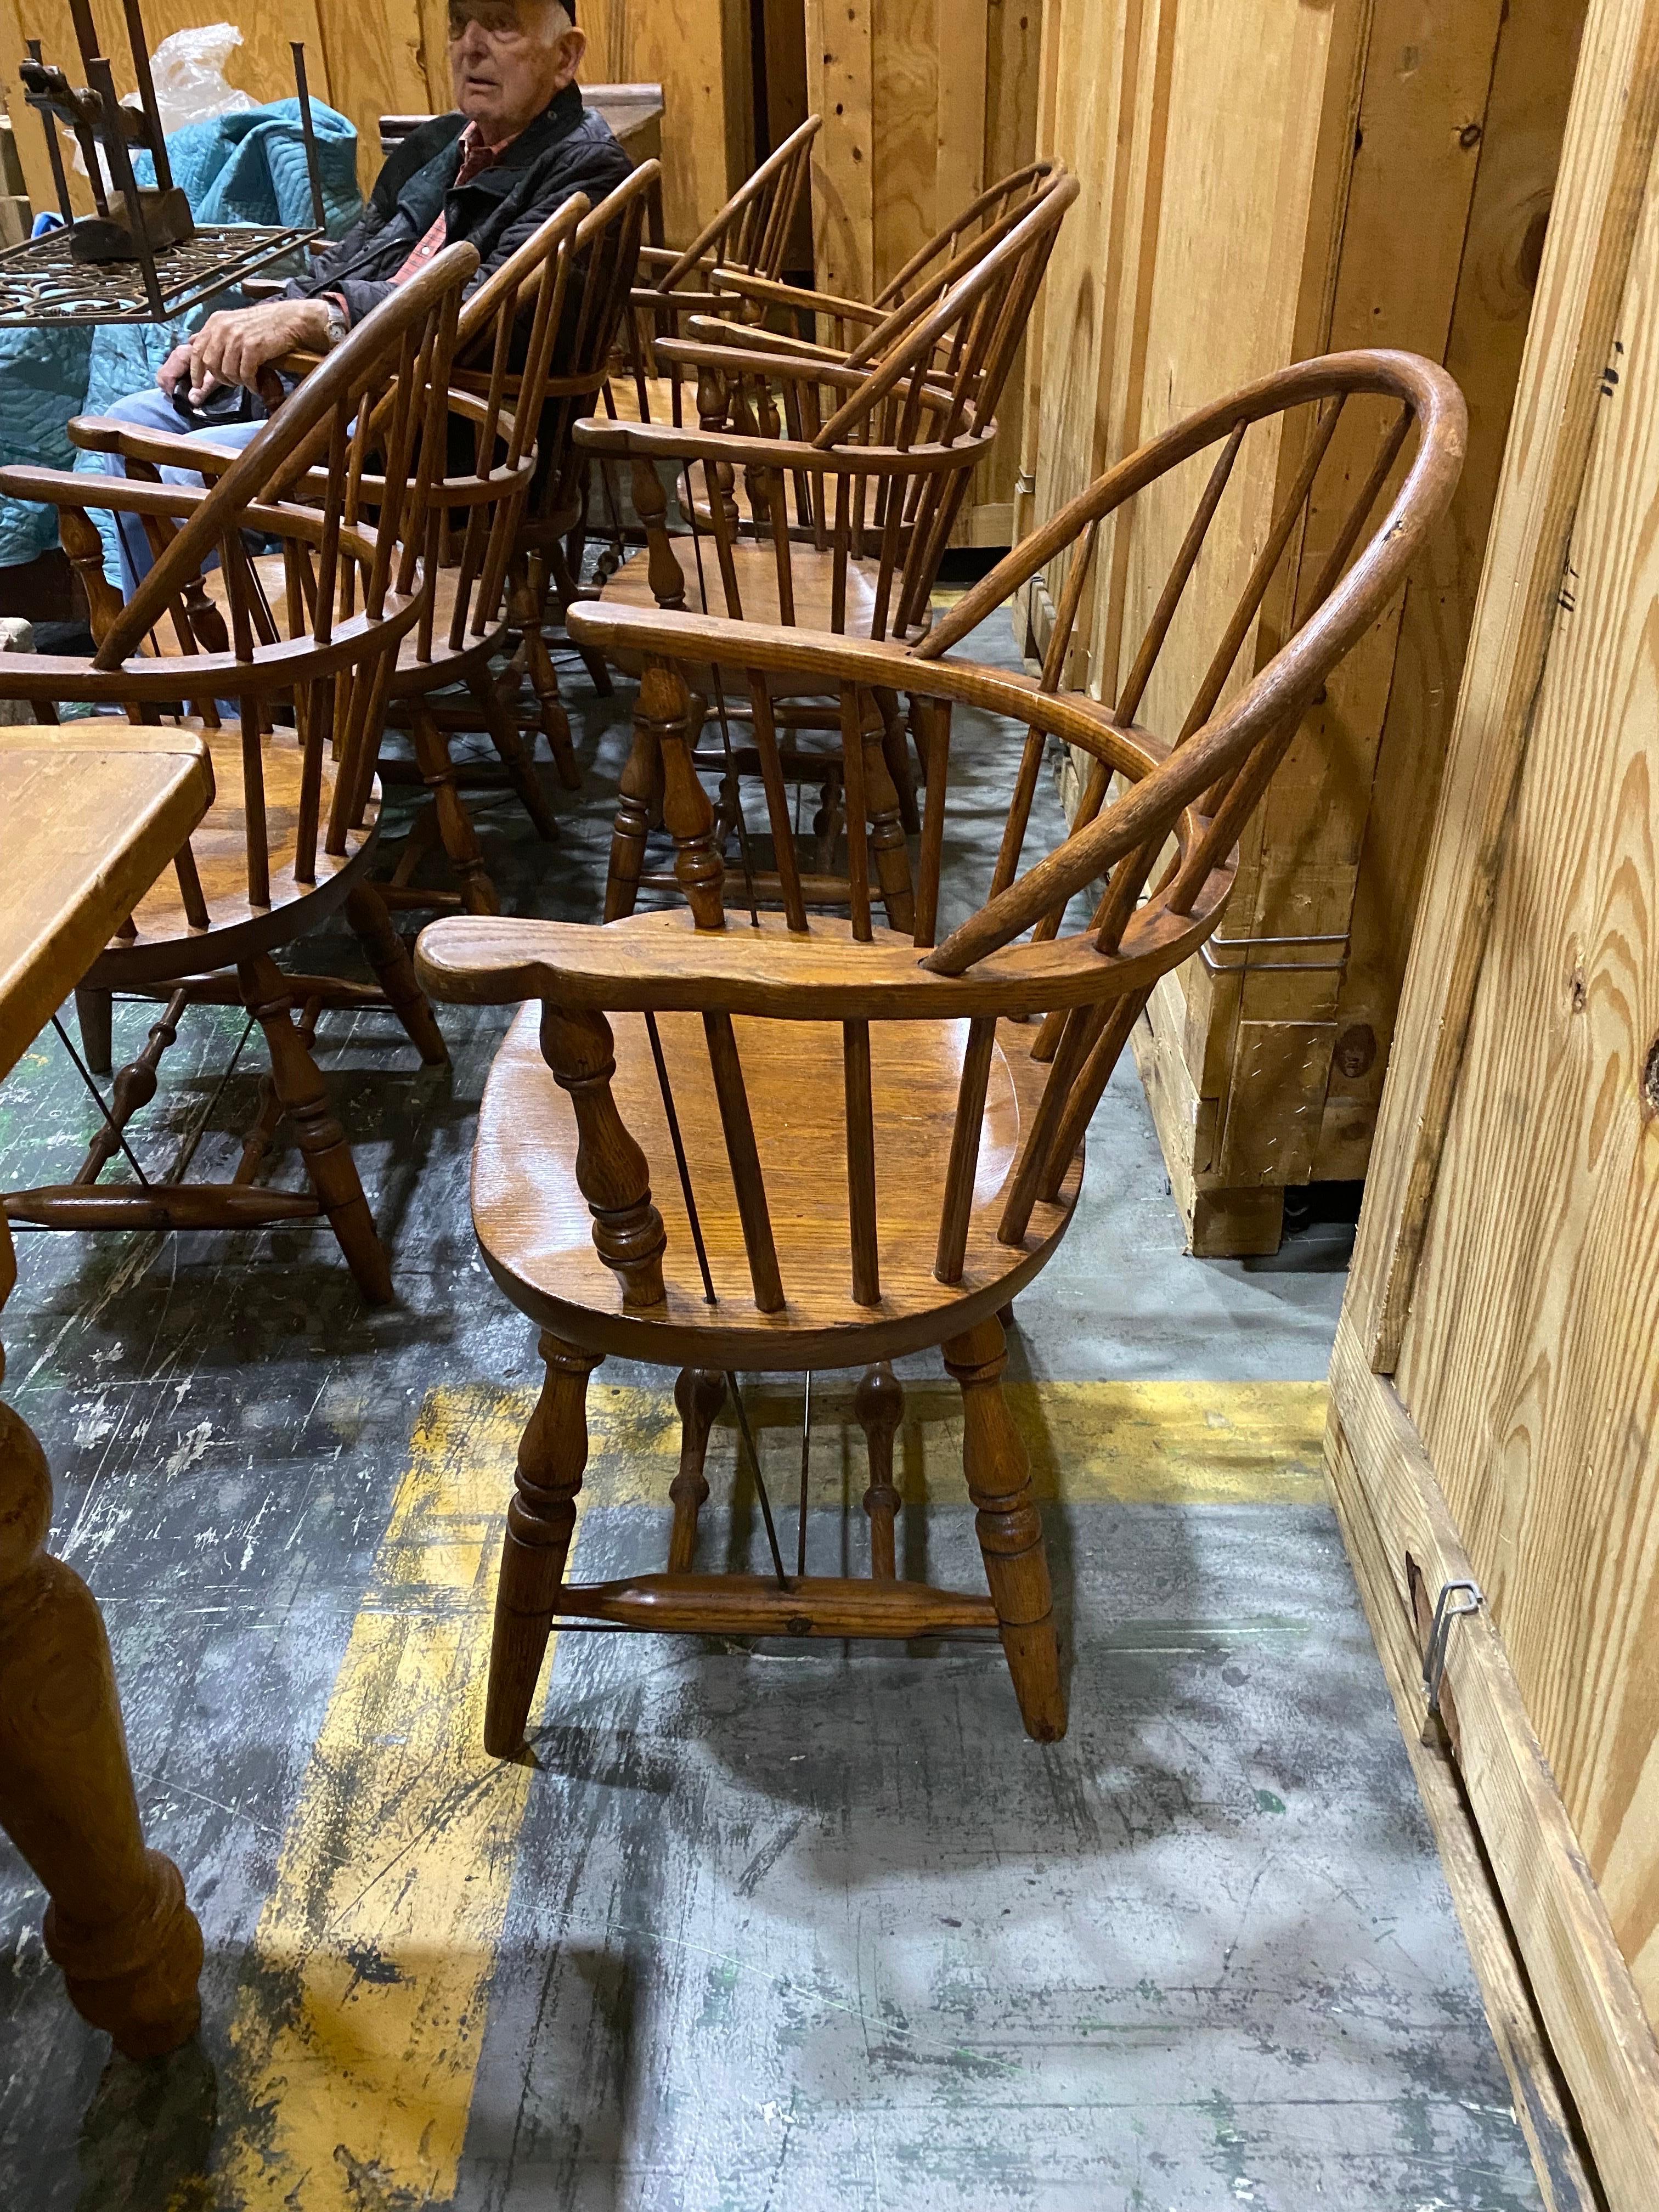 Set of Eight 20th Century Windsor armchairs by Nichols & Stone
A handsome group of eight American Windsor Chairs made by one of the oldest furniture companies in the United States. Solid oak, some chairs with reinforcement rods. Some general wear